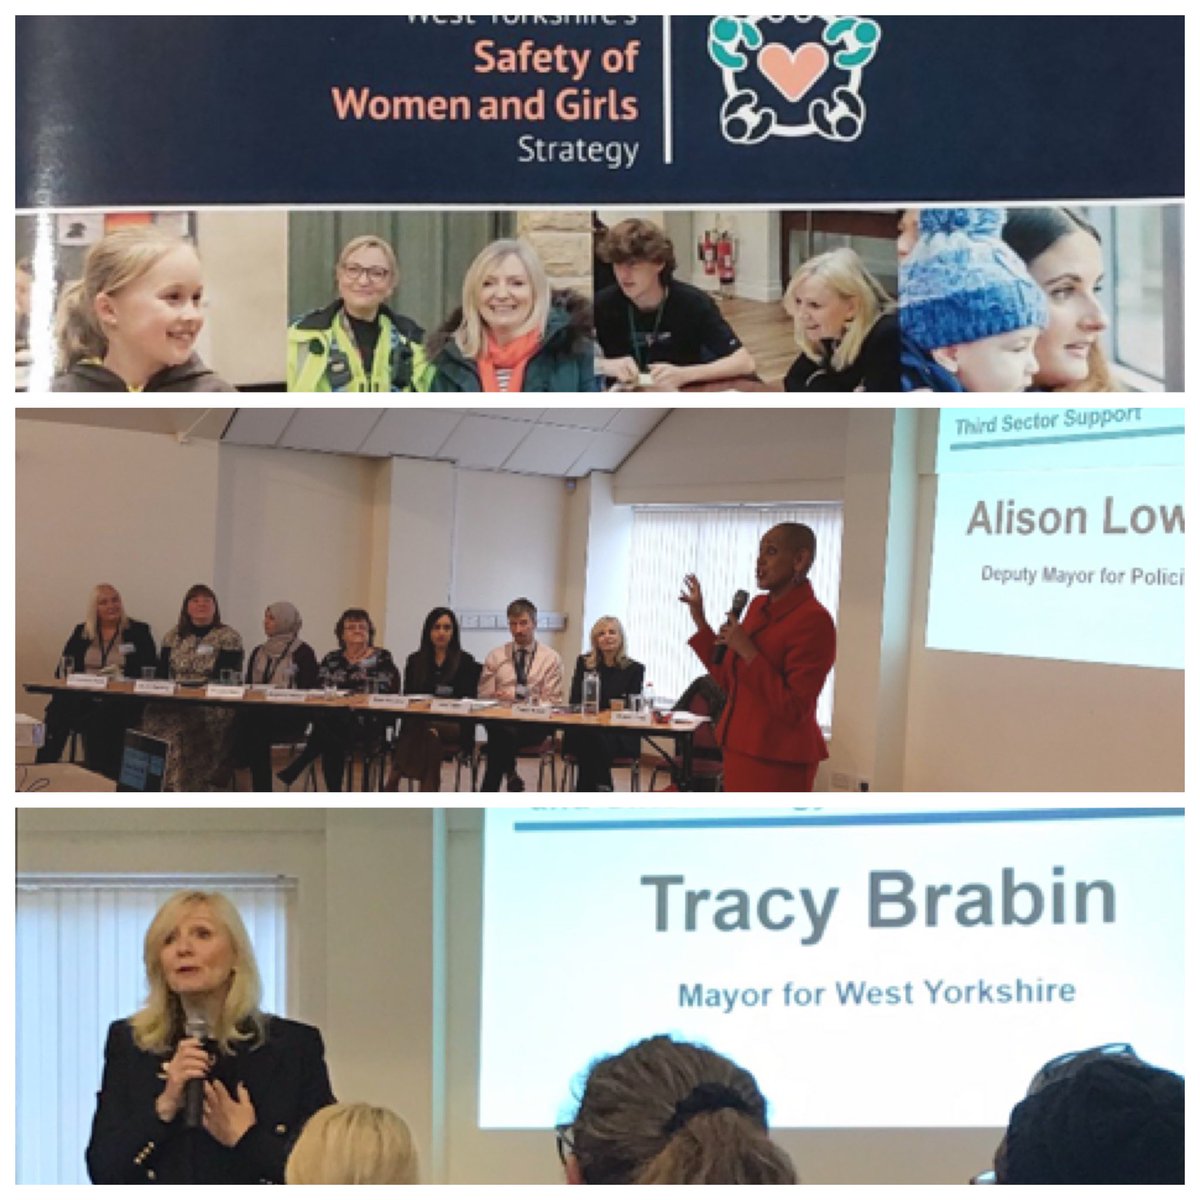 Today was all about the Safety of Women & Girls at the @MayorOfWY launch of her WY Strategy.

Humbled to have been part of this historic event & speak about @StayingPutUK & #VCSE contributions to #EVAWG  along inspirational women @DeputyMayorPCWY @RuthieDavany @WomenCentreCK CEO